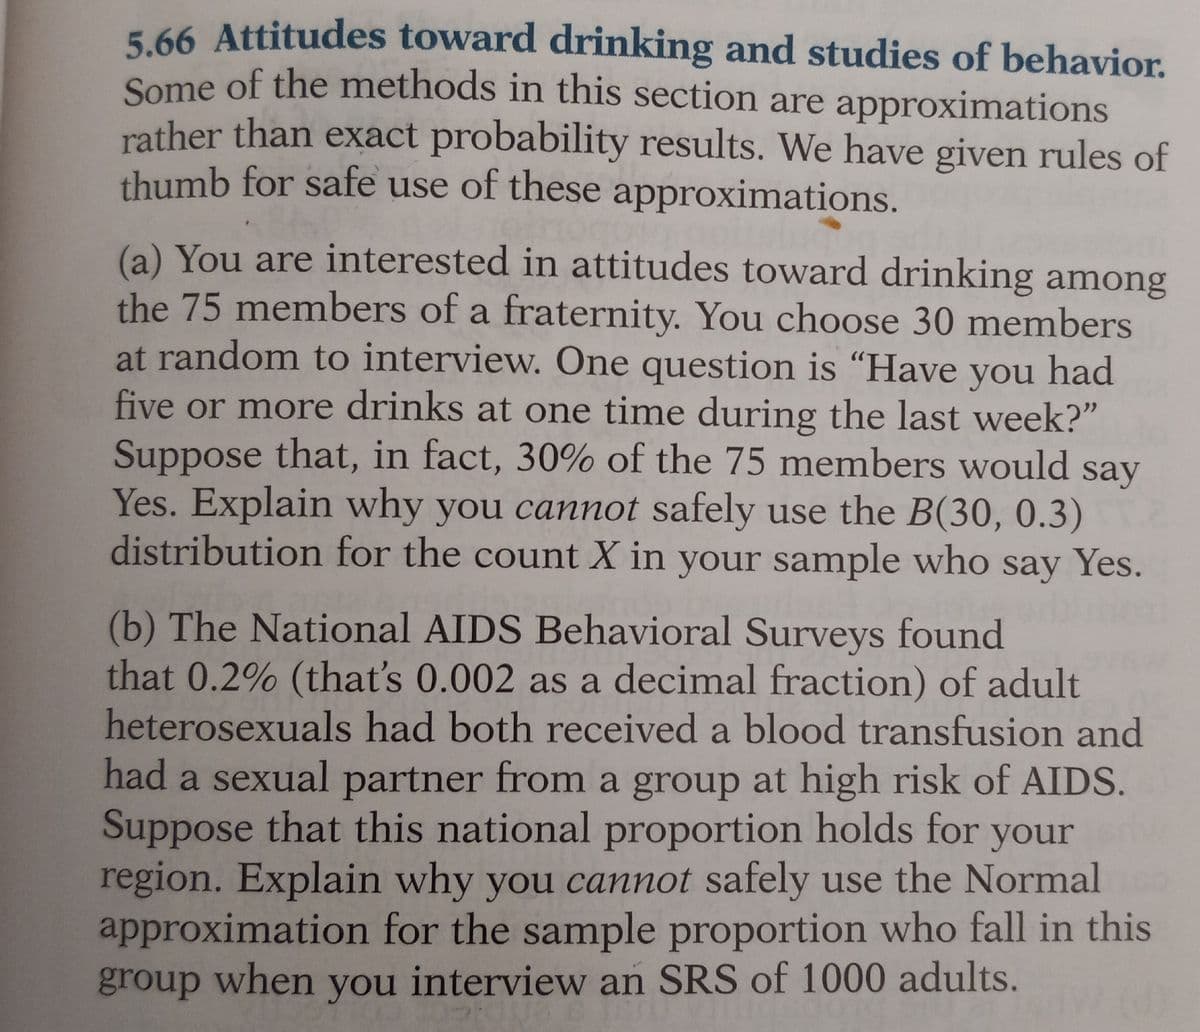 5.66 Attitudes toward drinking and studies of behavior.
Some of the methods in this section are approximations
rather than exact probability results. We have given rules of
thumb for safe use of these approximations.
(a) You are interested in attitudes toward drinking among
the 75 members of a fraternity. You choose 30 members
at random to interview. One question is "Have you had
five or more drinks at one time during the last week?"
Suppose that, in fact, 30% of the 75 members would say
Yes. Explain why you cannot safely use the B(30, 0.3)
distribution for the count X in your sample who say Yes.
(b) The National AIDS Behavioral Surveys found
that 0.2% (that's 0.002 as a decimal fraction) of adult
heterosexuals had both received a blood transfusion and
had a sexual partner from a group at high risk of AIDS.
Suppose that this national proportion holds for your
region. Explain why you cannot safely use the Normal
approximation for the sample proportion who fall in this
group when you interview an SRS of 1000 adults.
PRODA